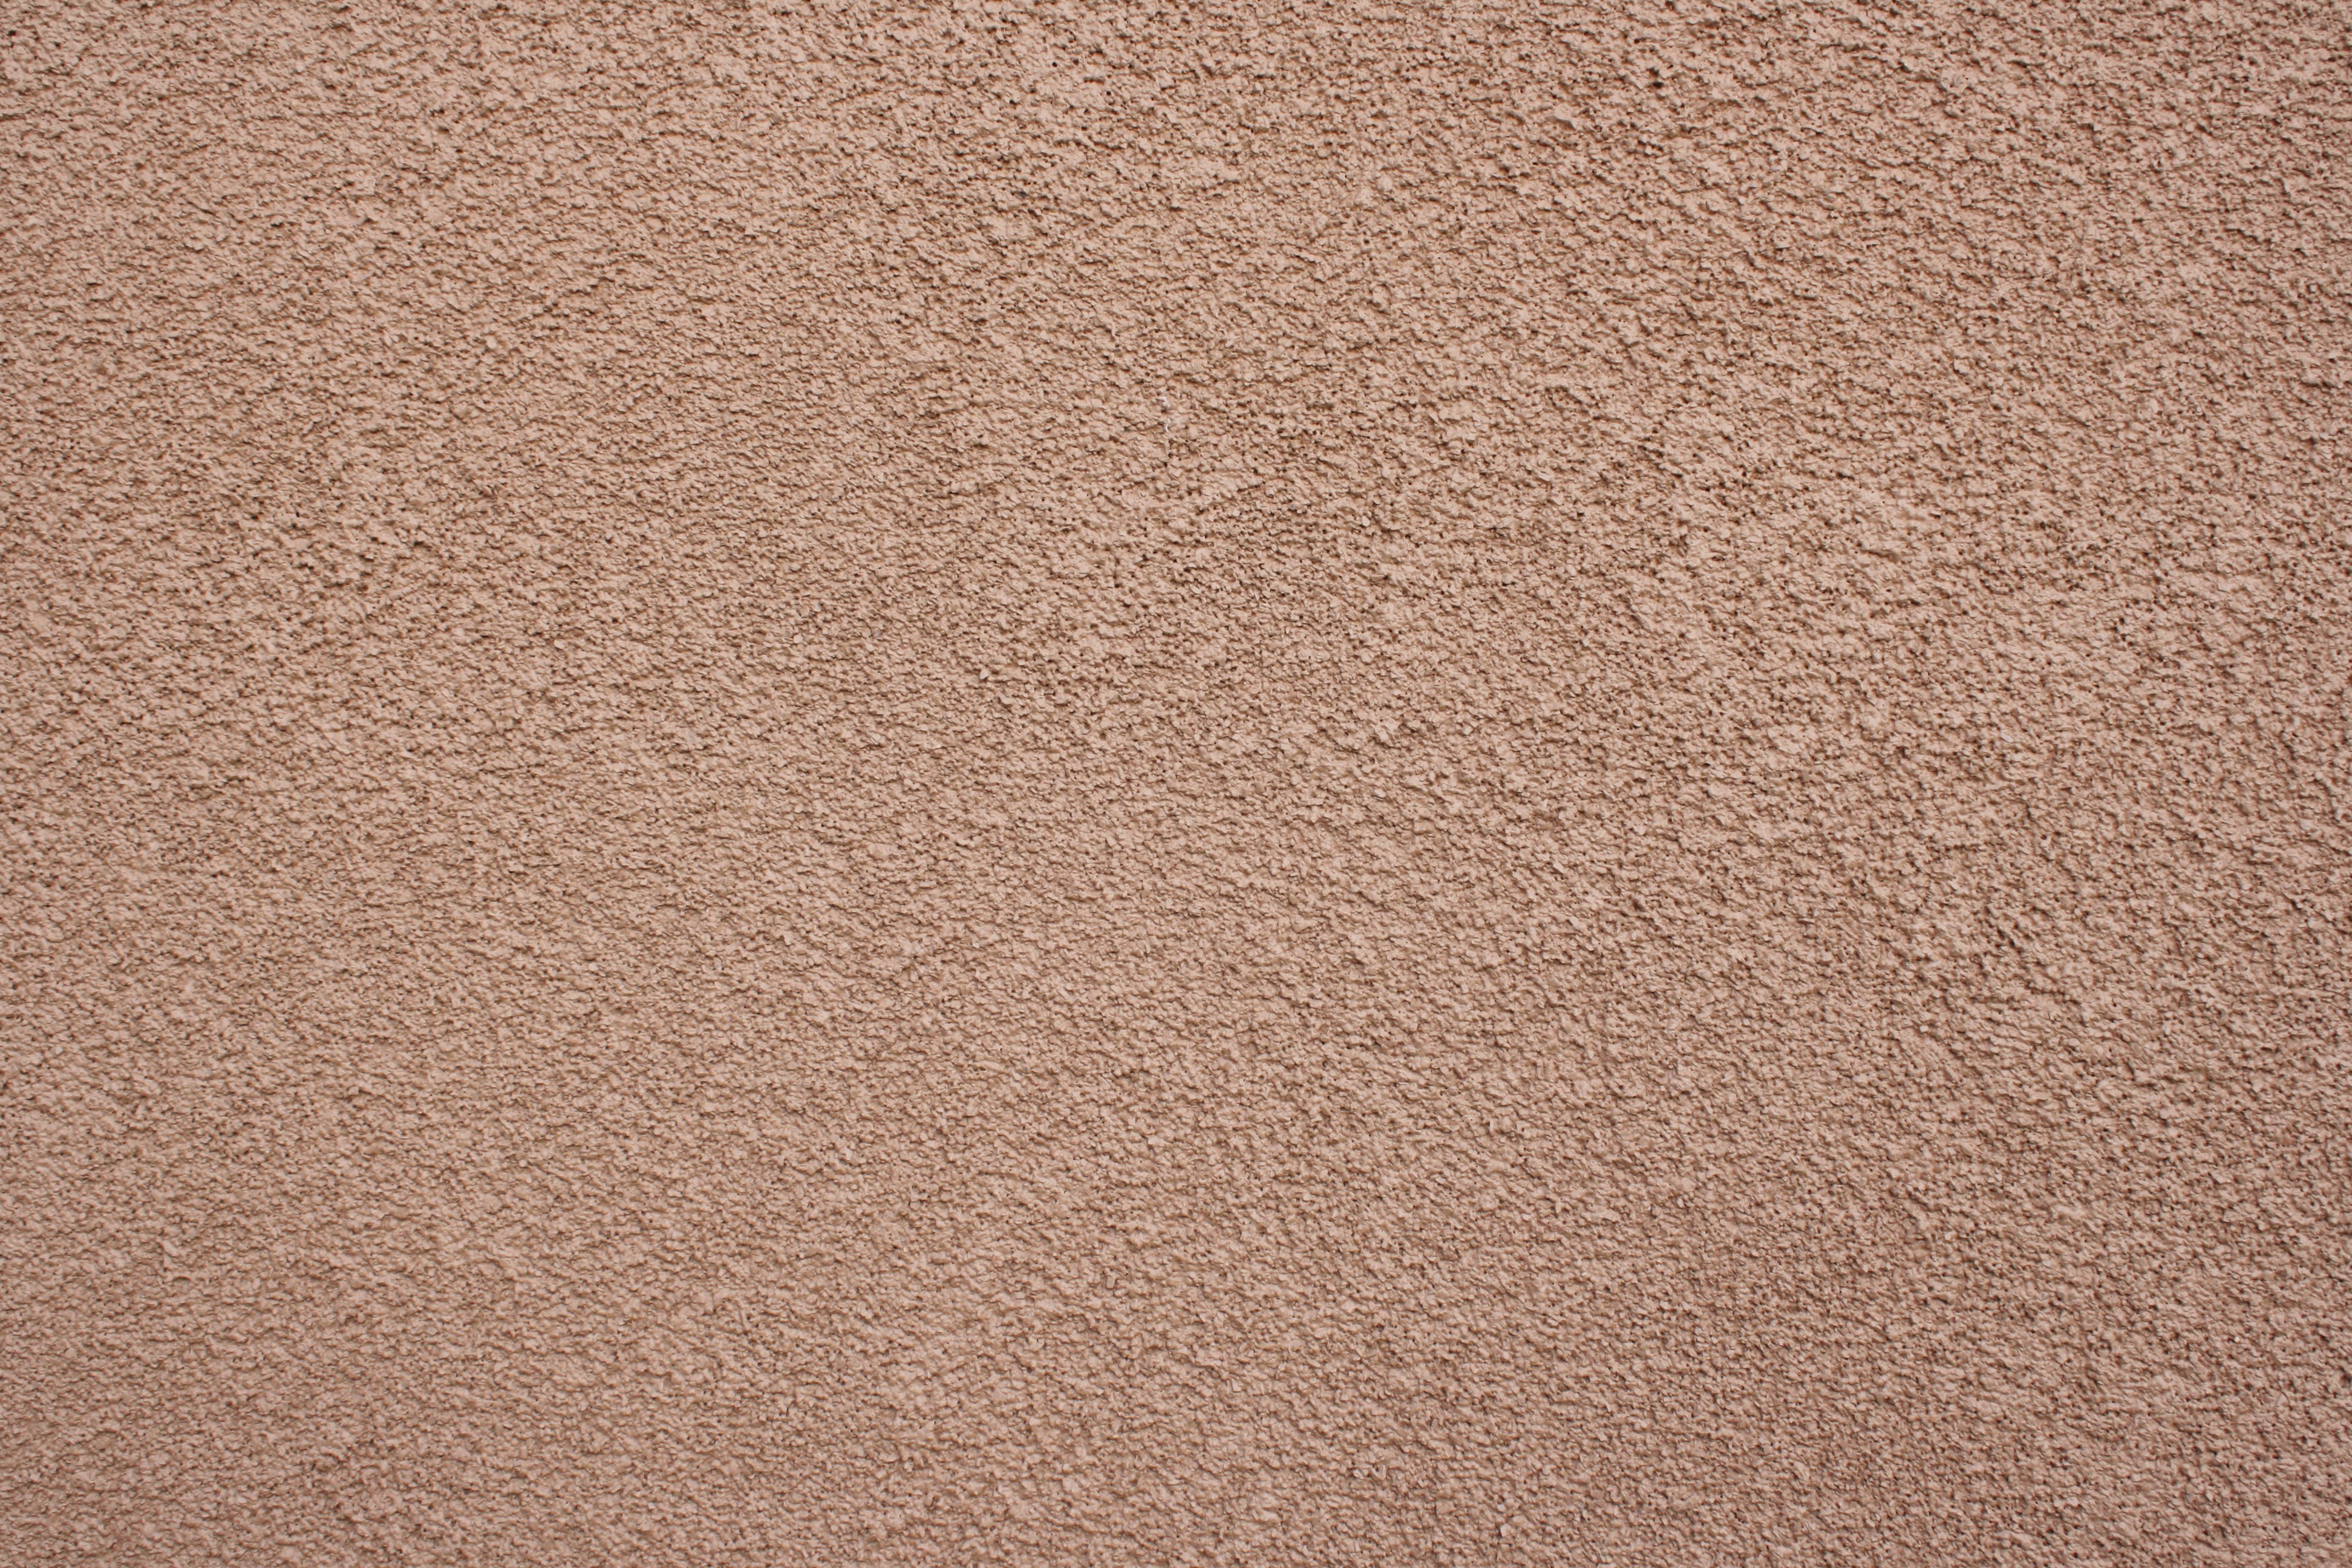 Tan Stucco Wall Texture Picture | Free Photograph | Photos Public Domain